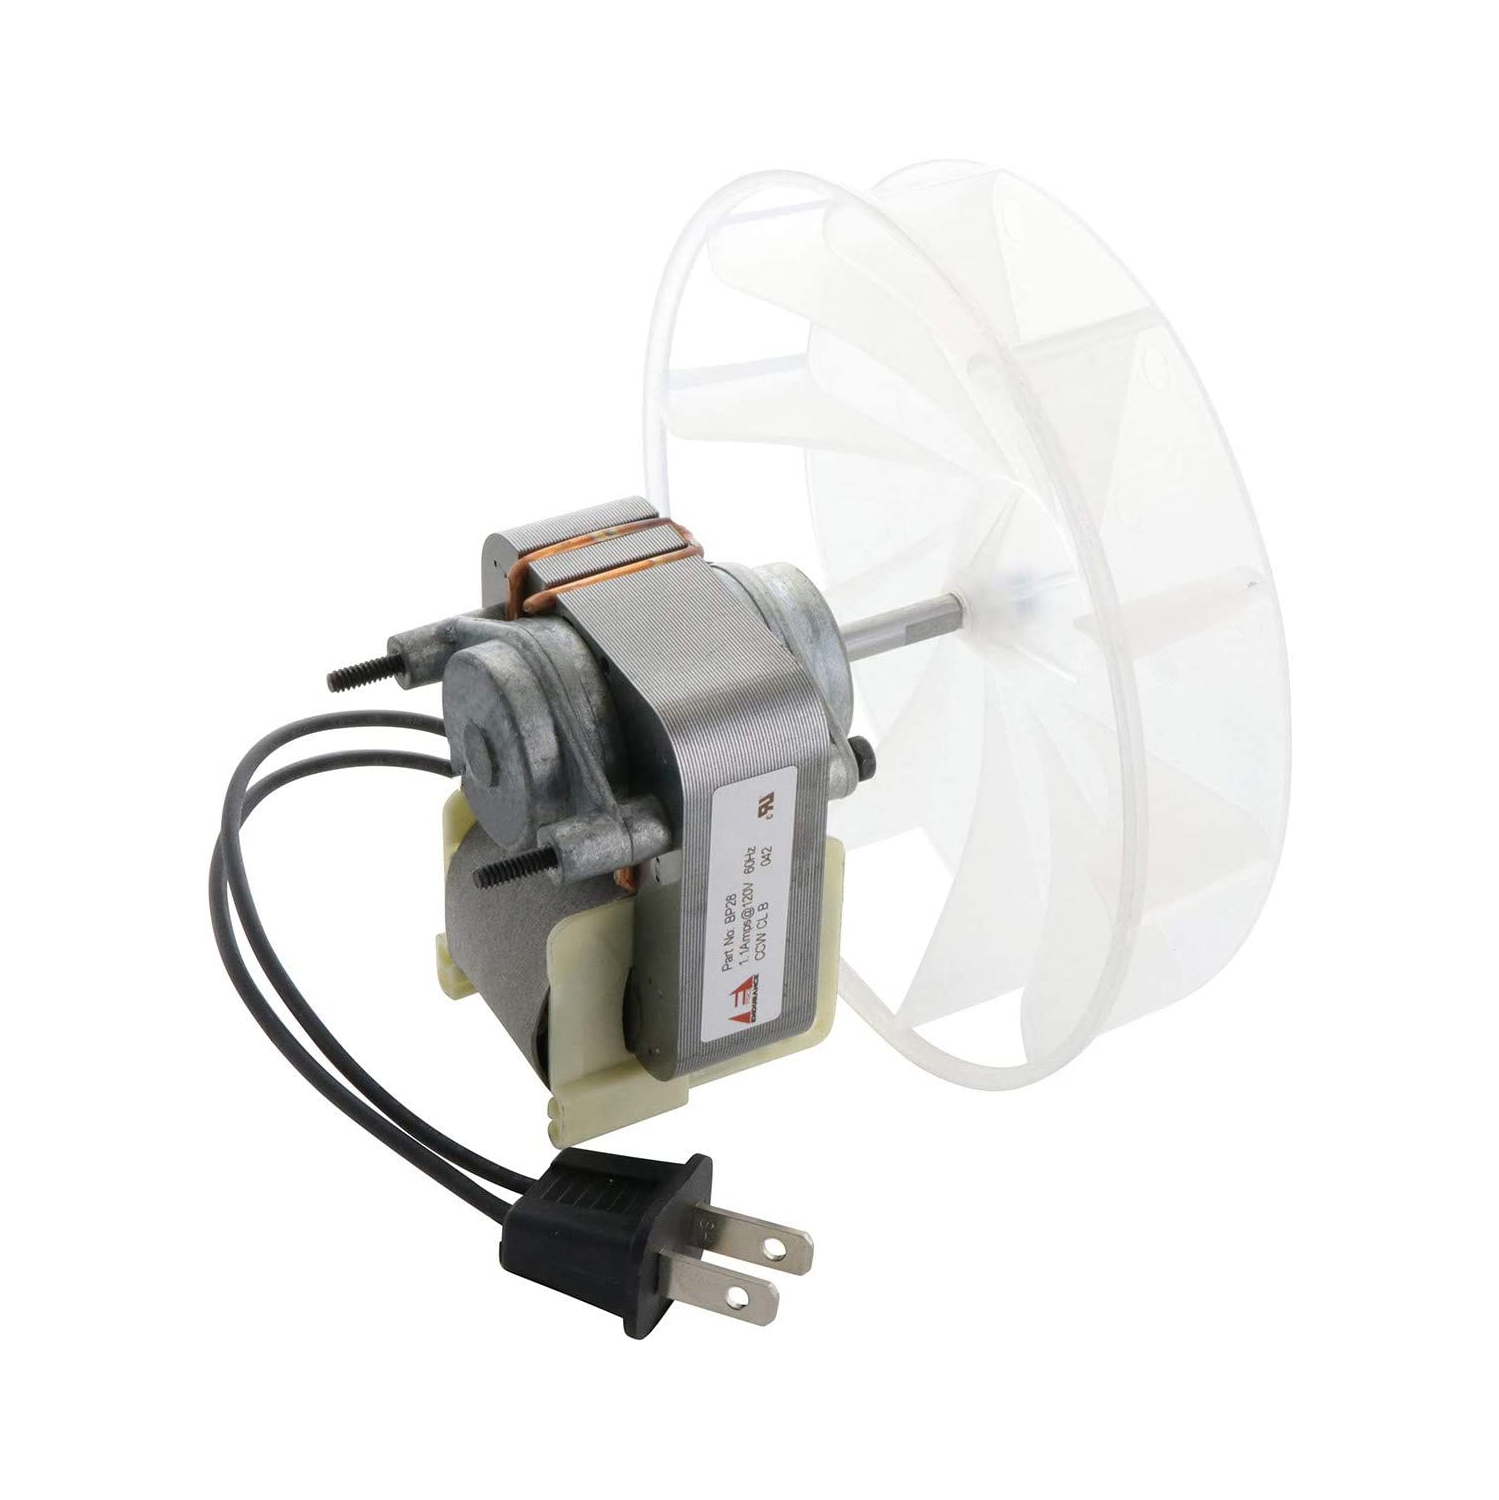 BRB Product _ Pro BP28 Bath Fan Motor 99080166 and Blower Wheel Replacement for Broan Nutone 70CFM 120V